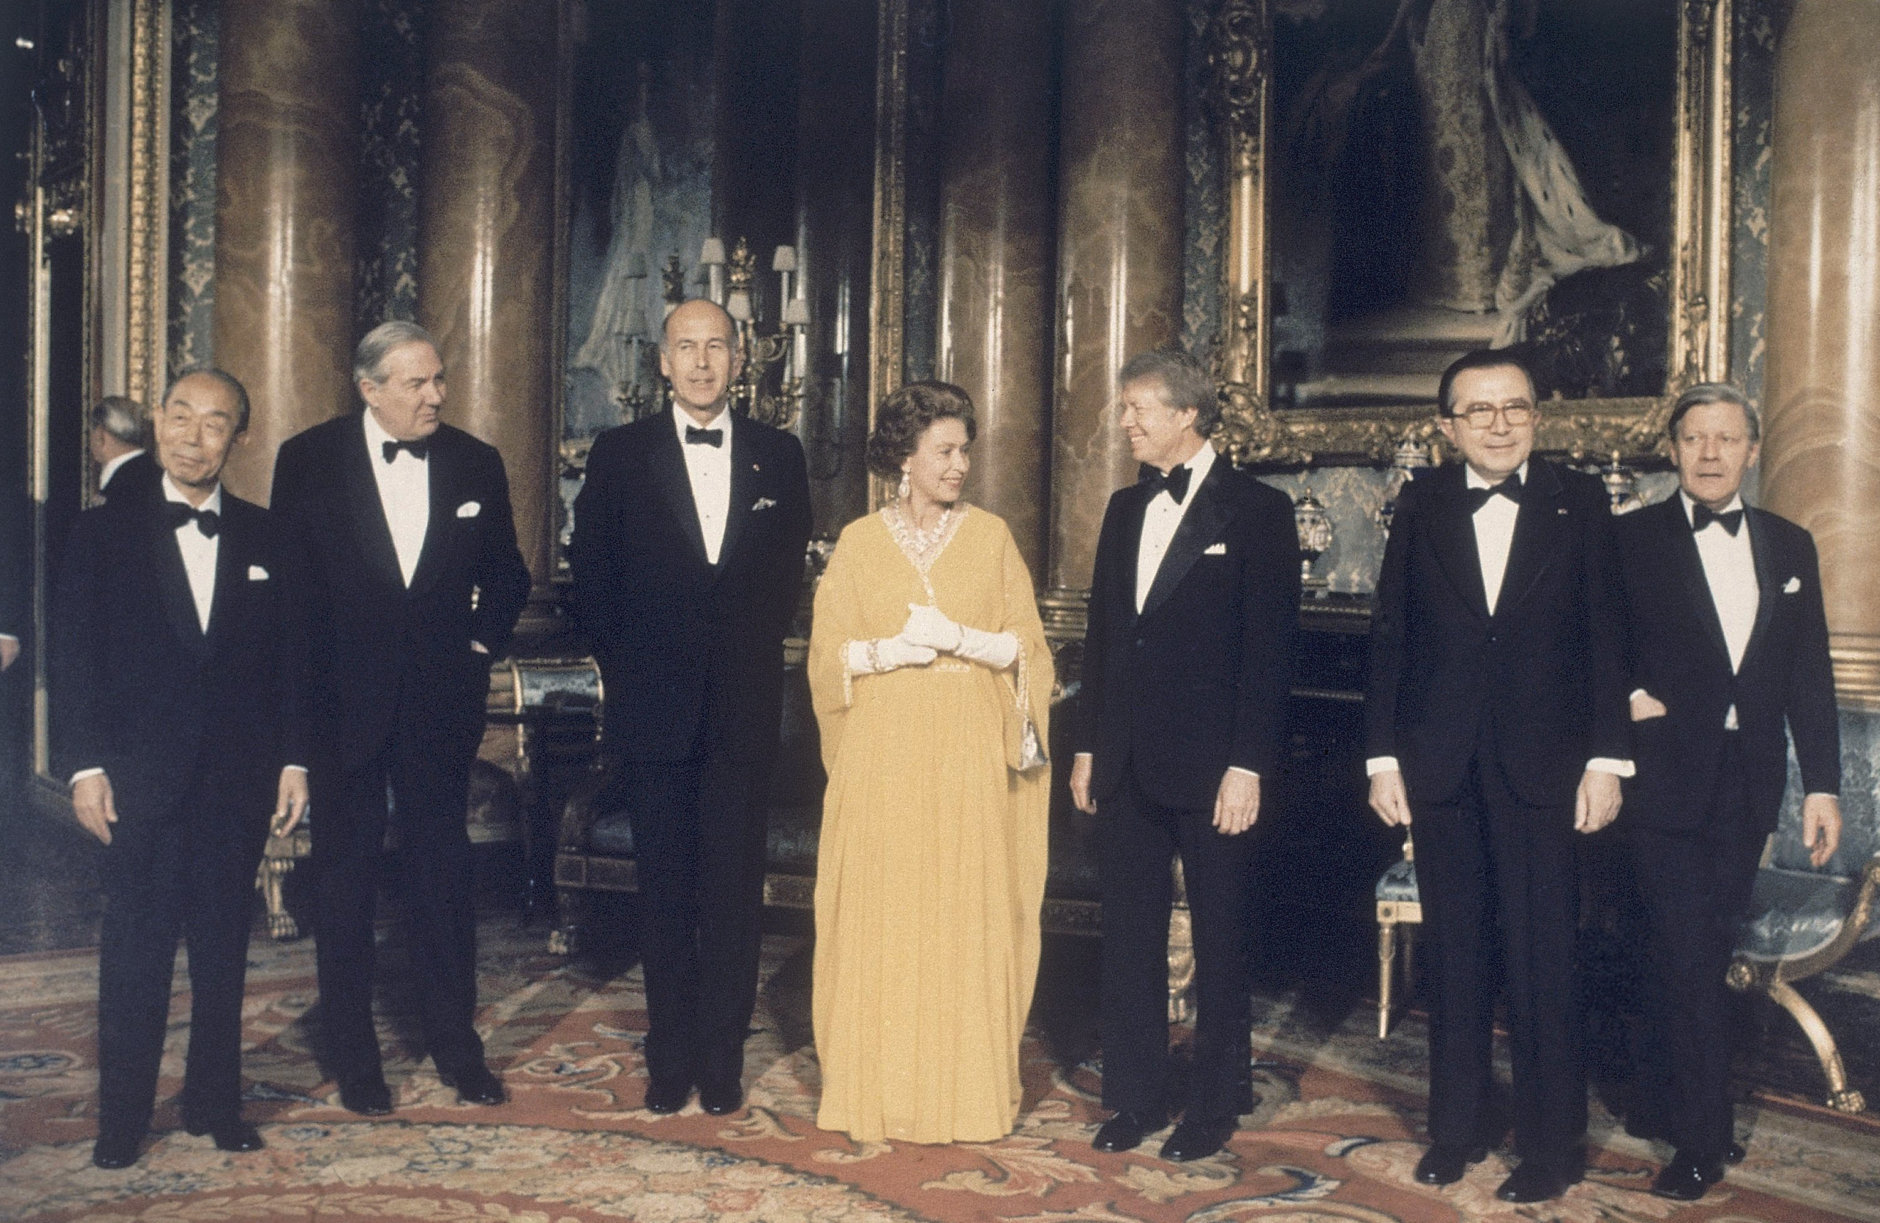 President Jimmy Carter the Queen ELizabet II of Enmgland with others on his trip to Newcastle in England,  May 1977. (AP Photo)